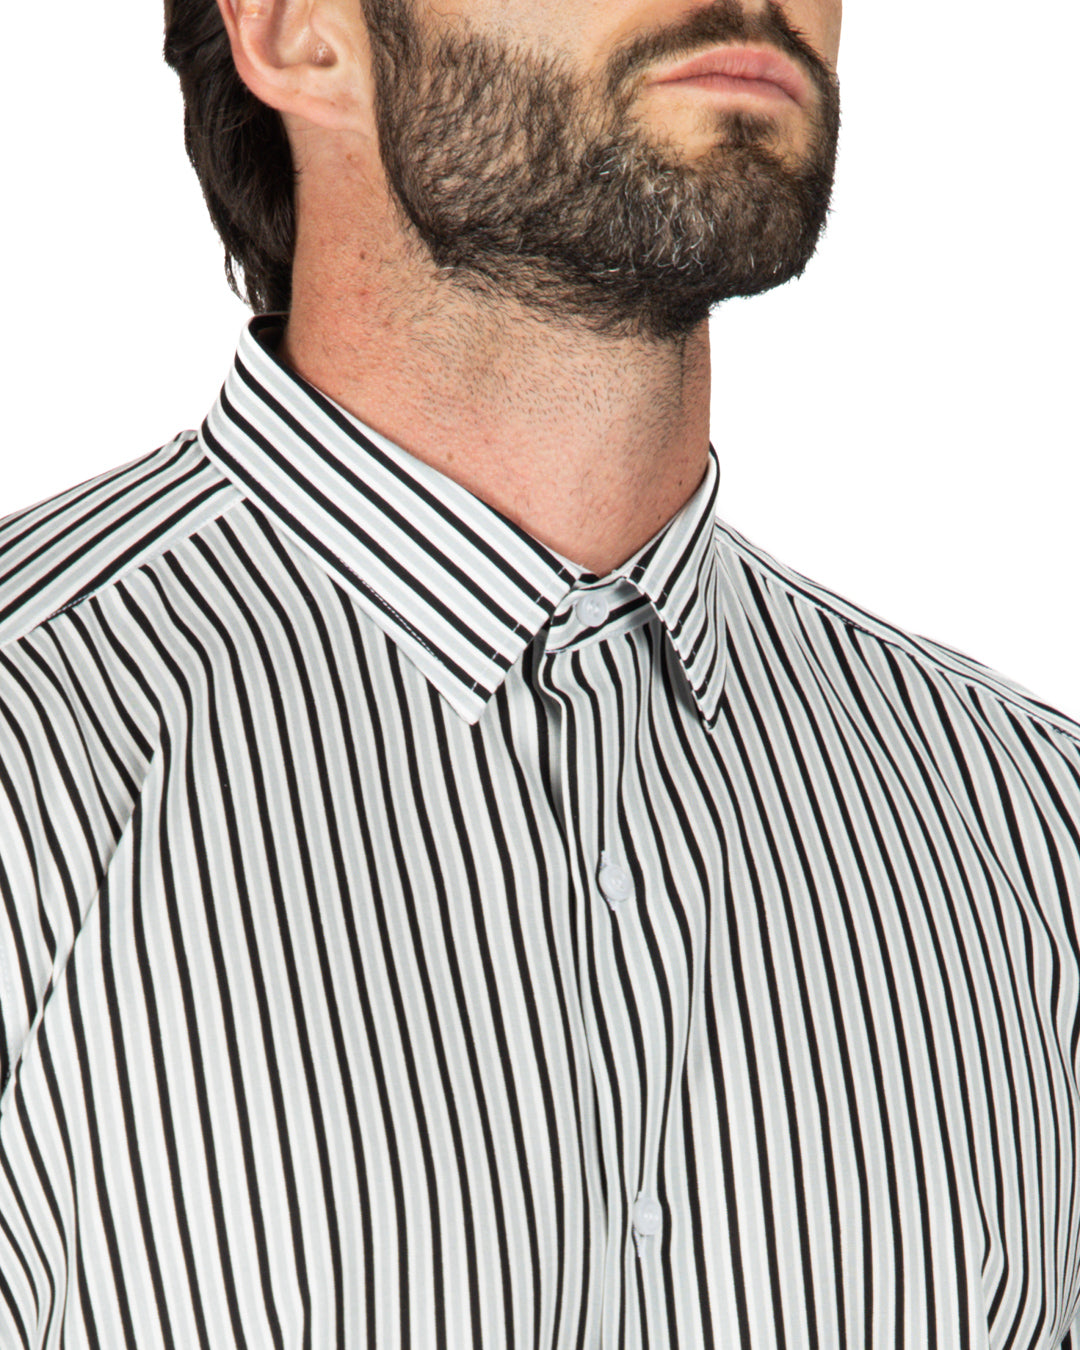 Grenada - Classic gray striped patterned shirt